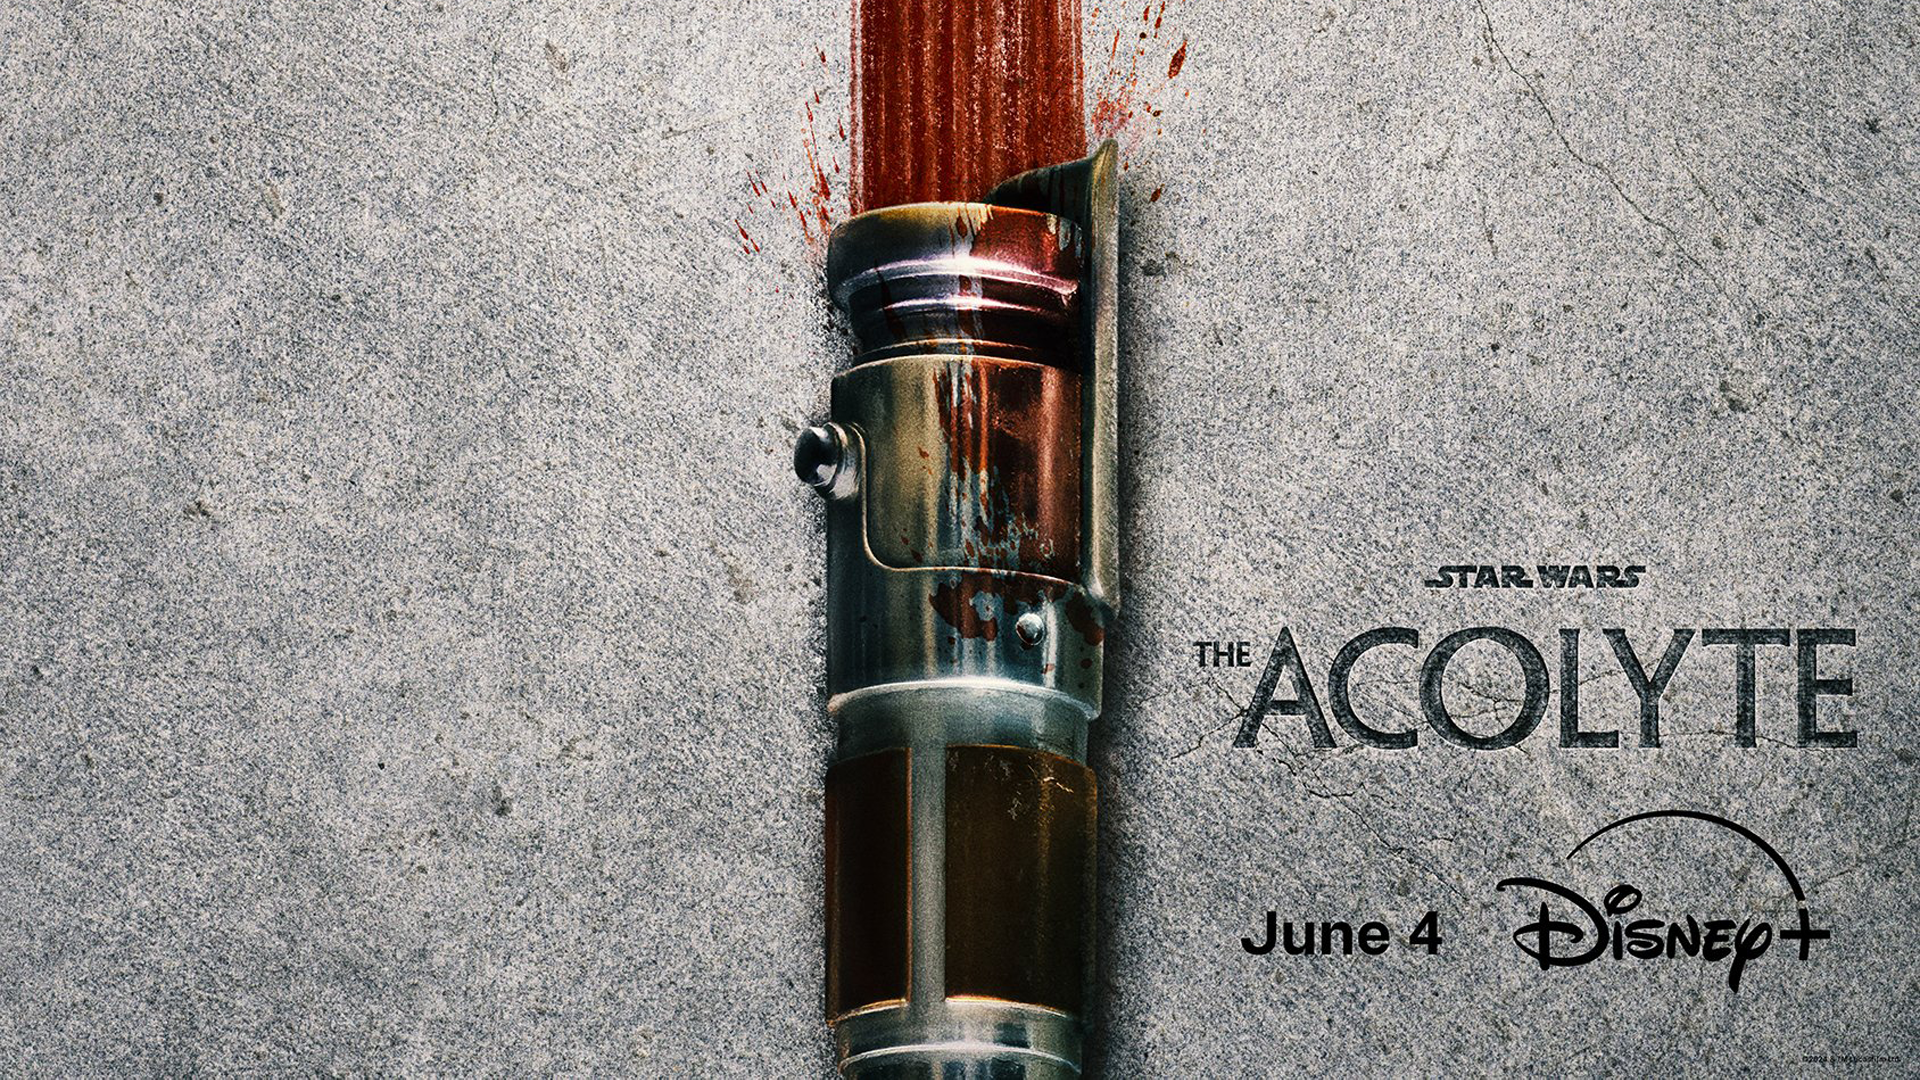 The Acolyte' Coming Out June